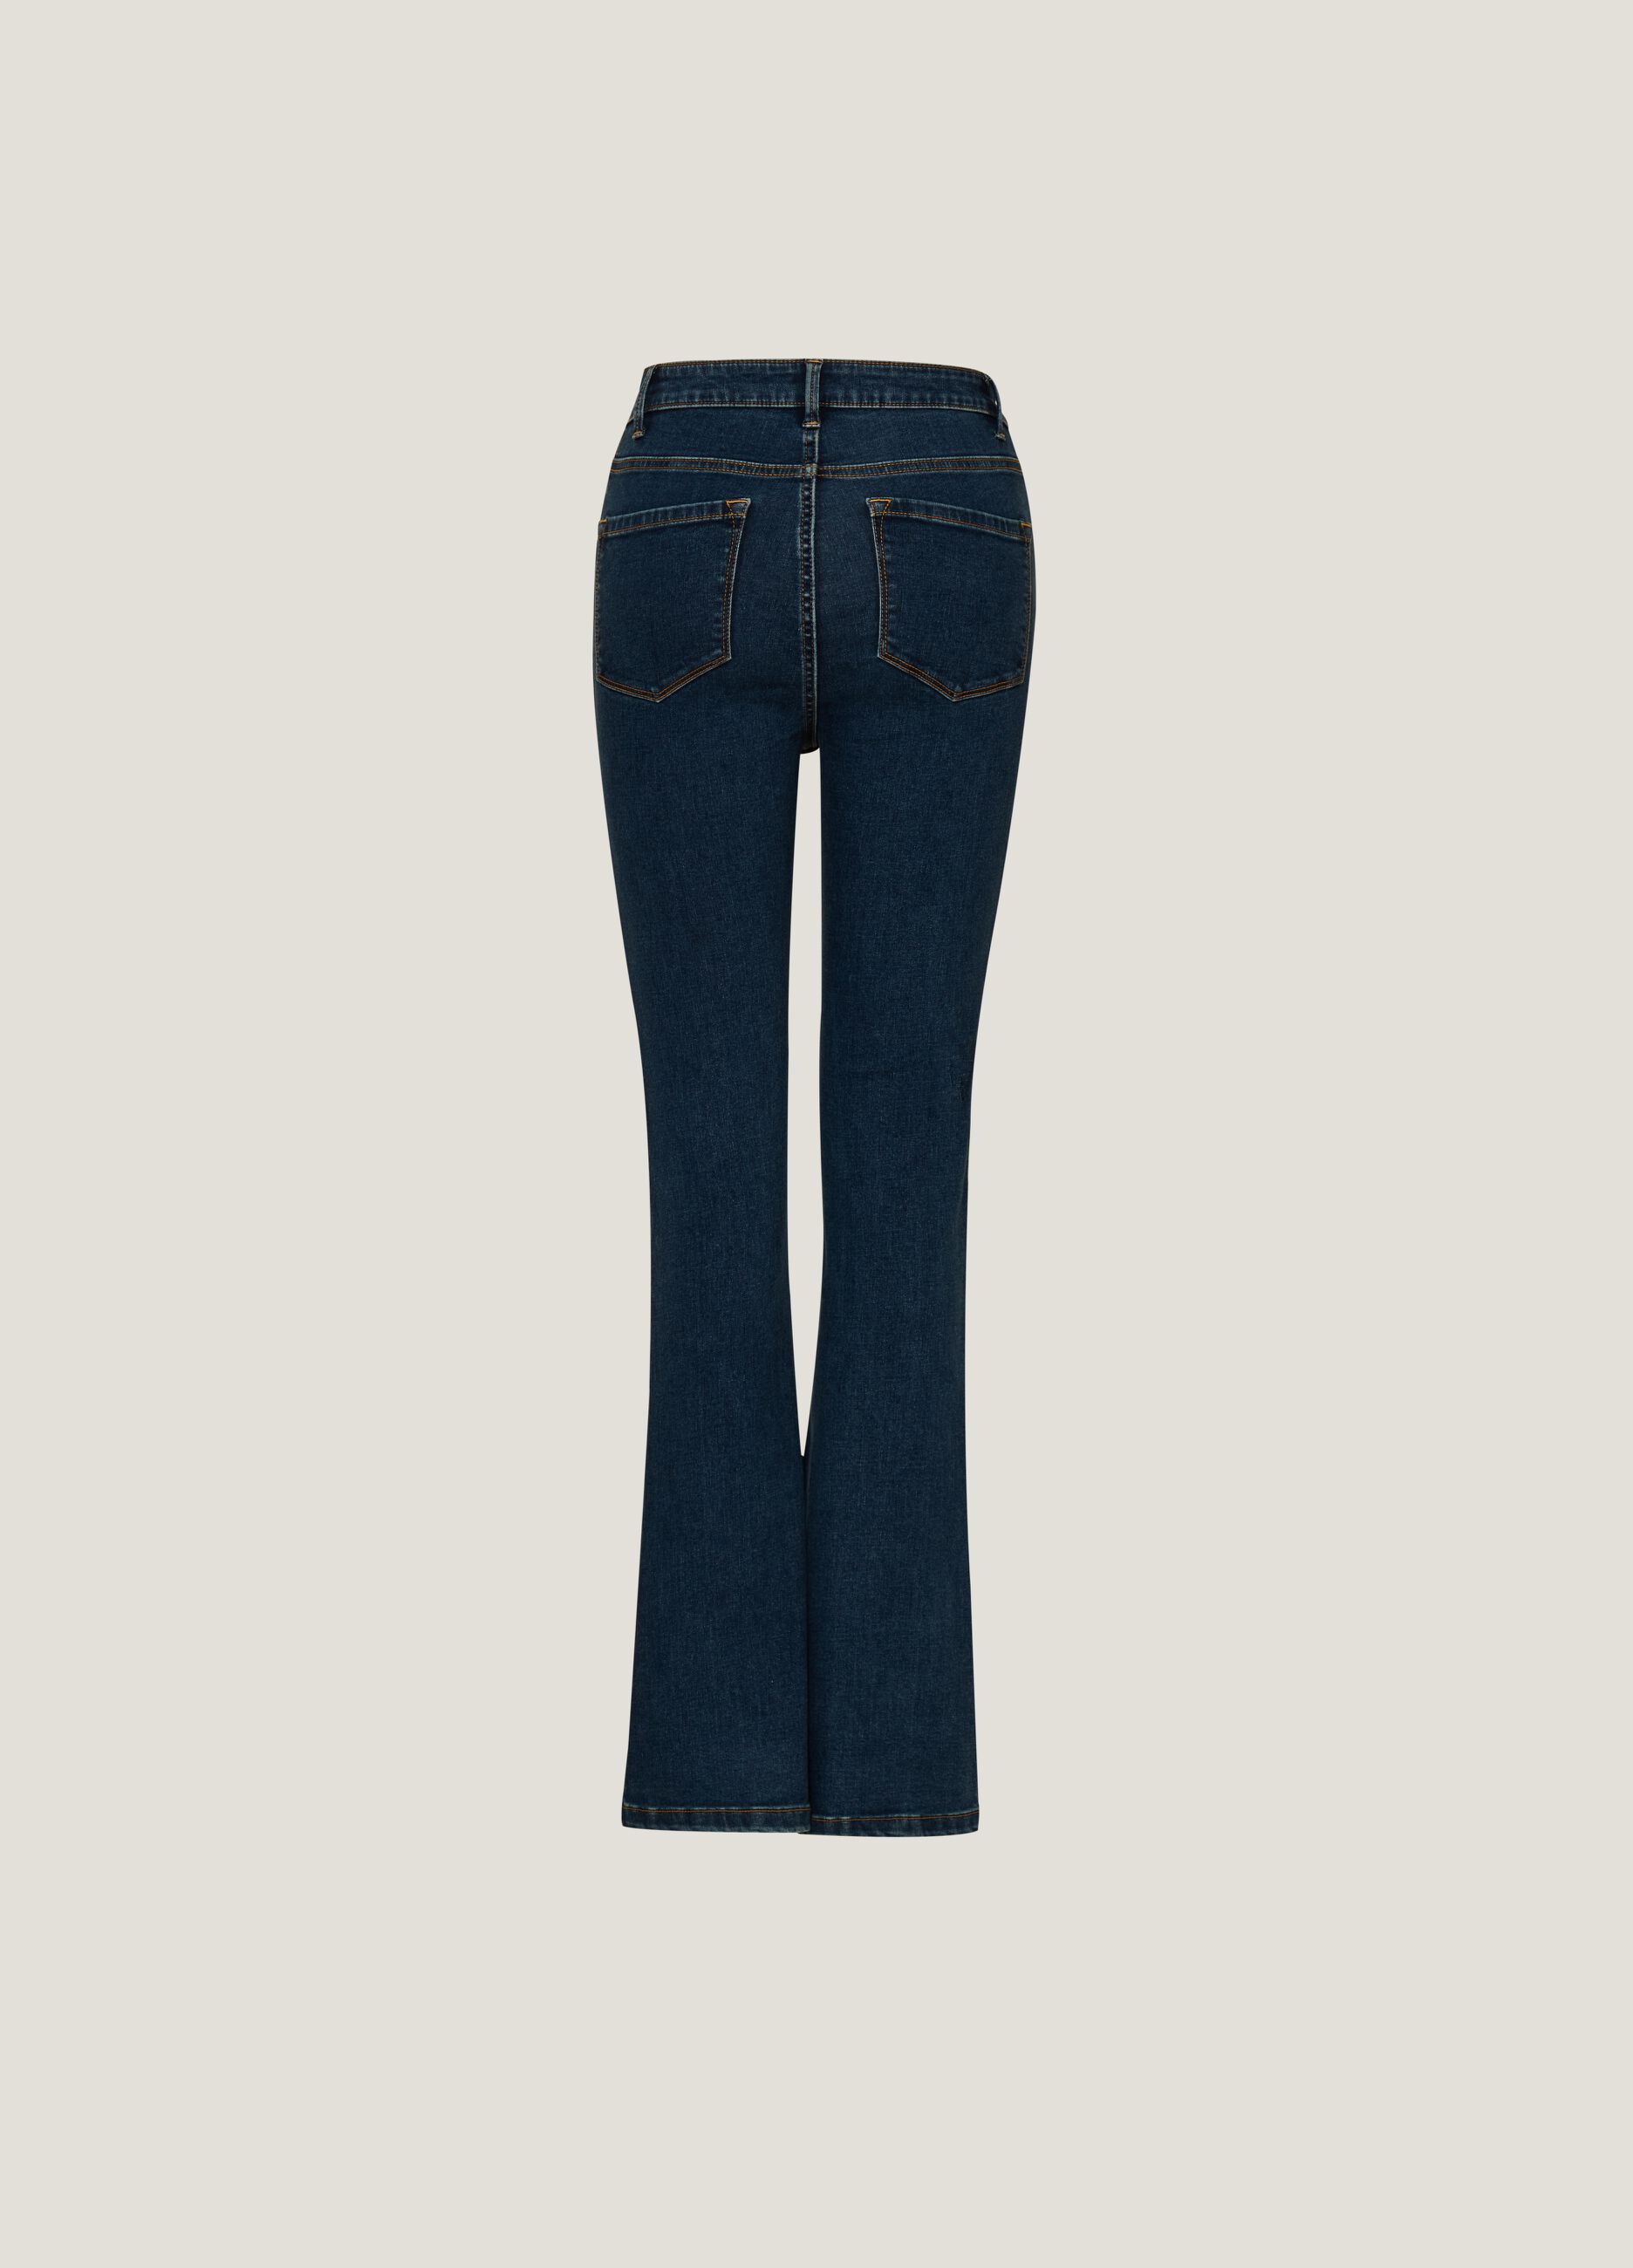 Jeans flare fit ultra slim